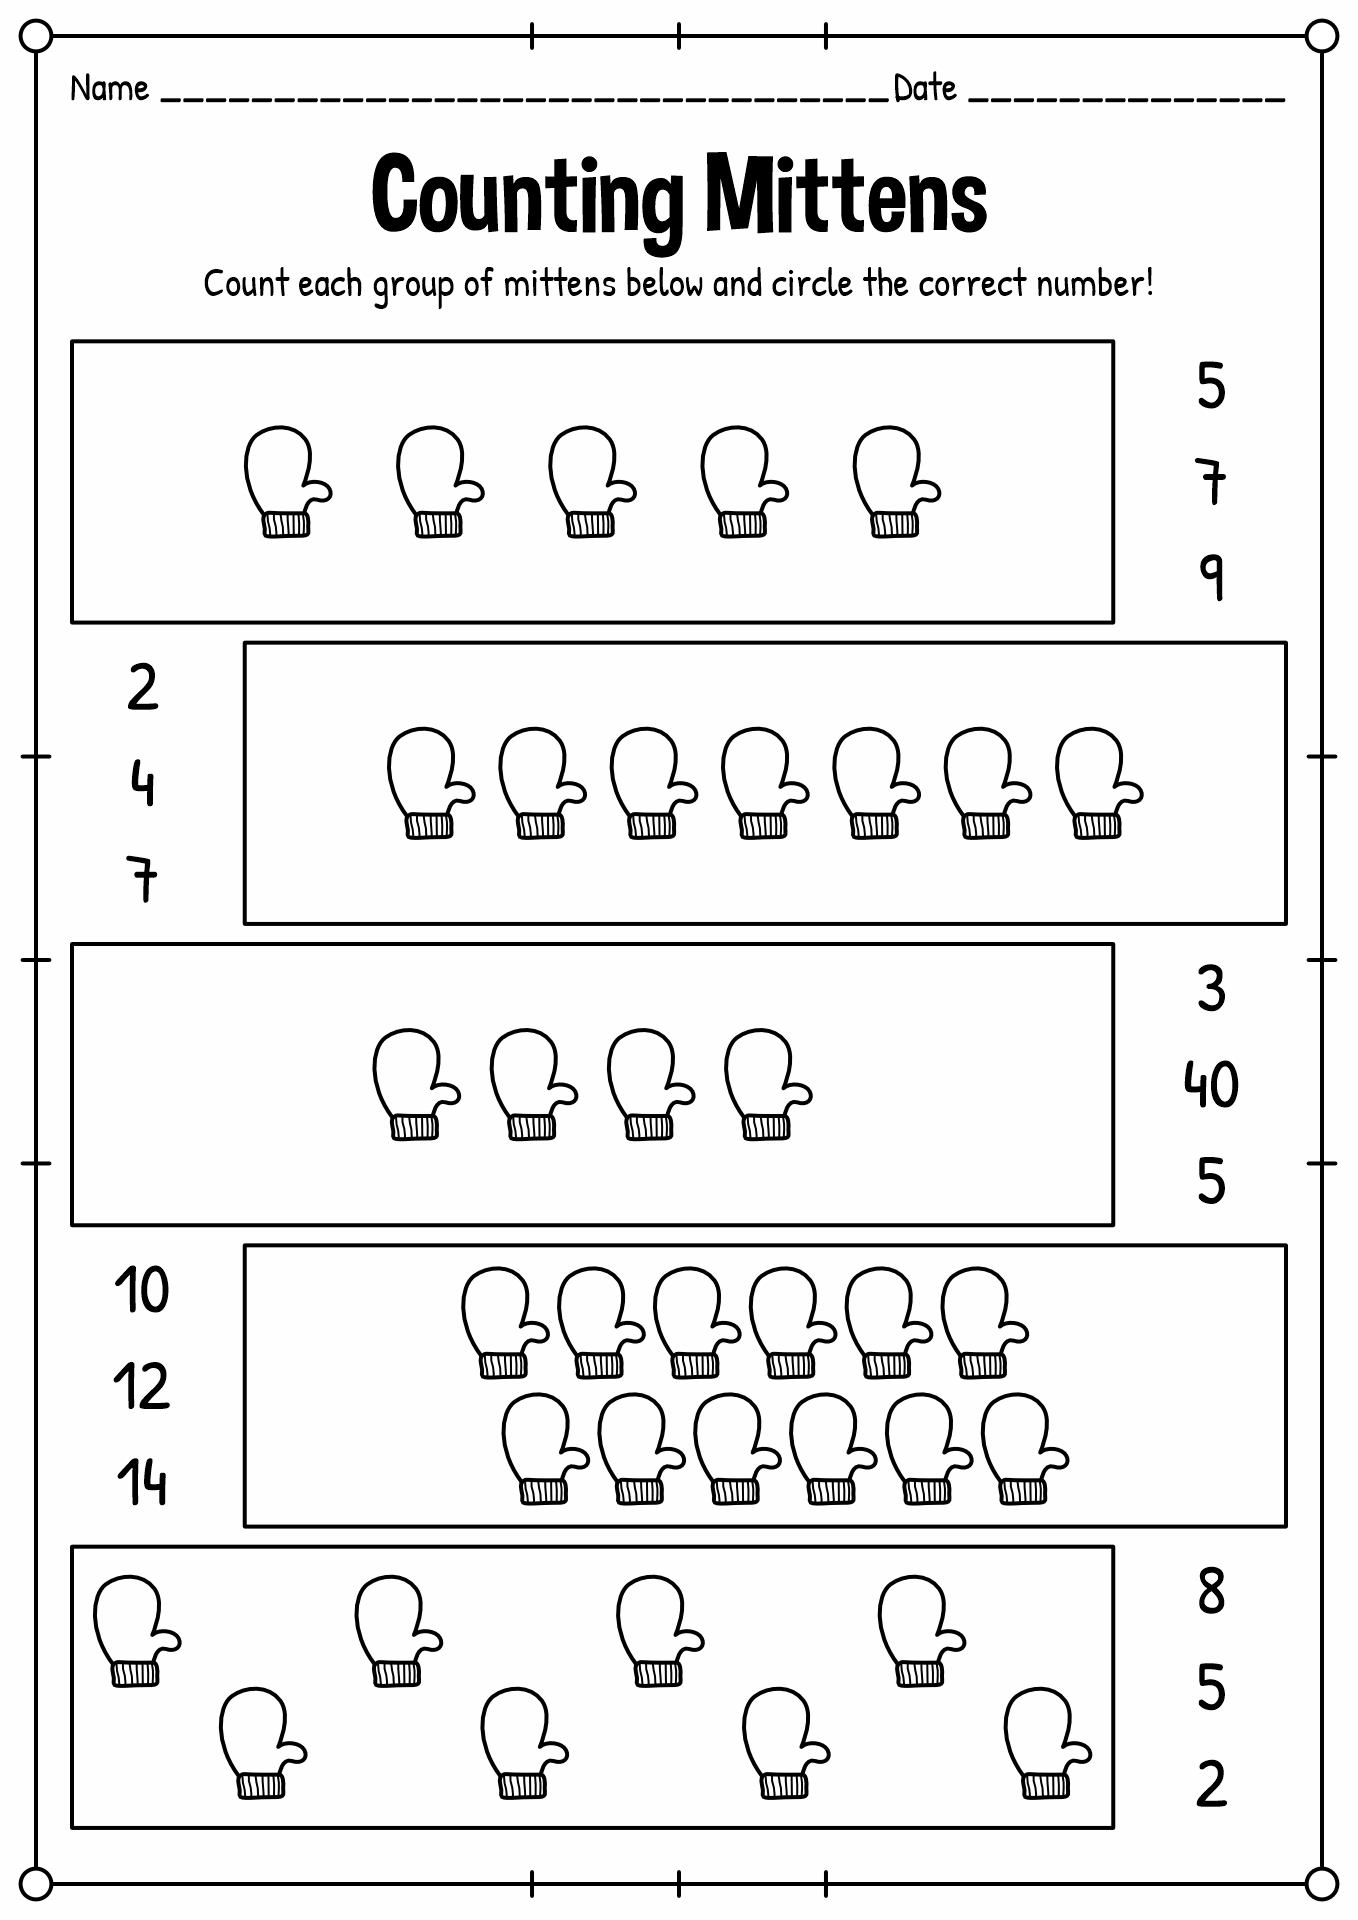 Counting Mittens Worksheet